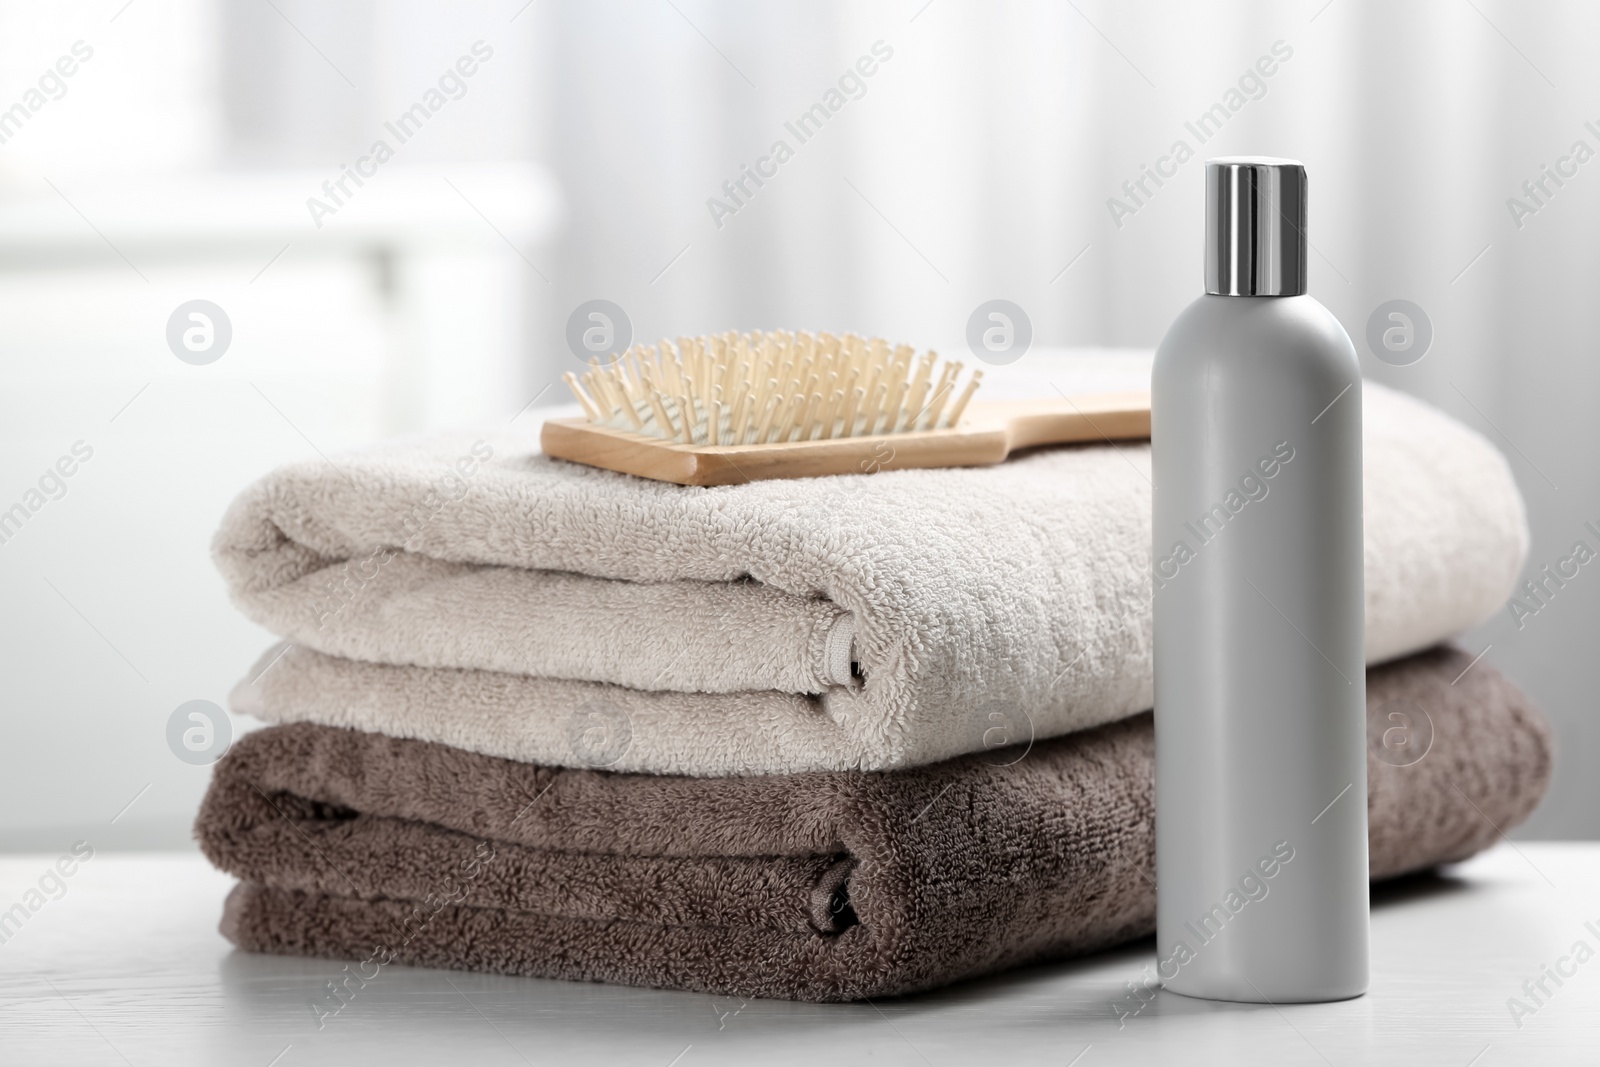 Photo of Towels with hair brush and shampoo on table